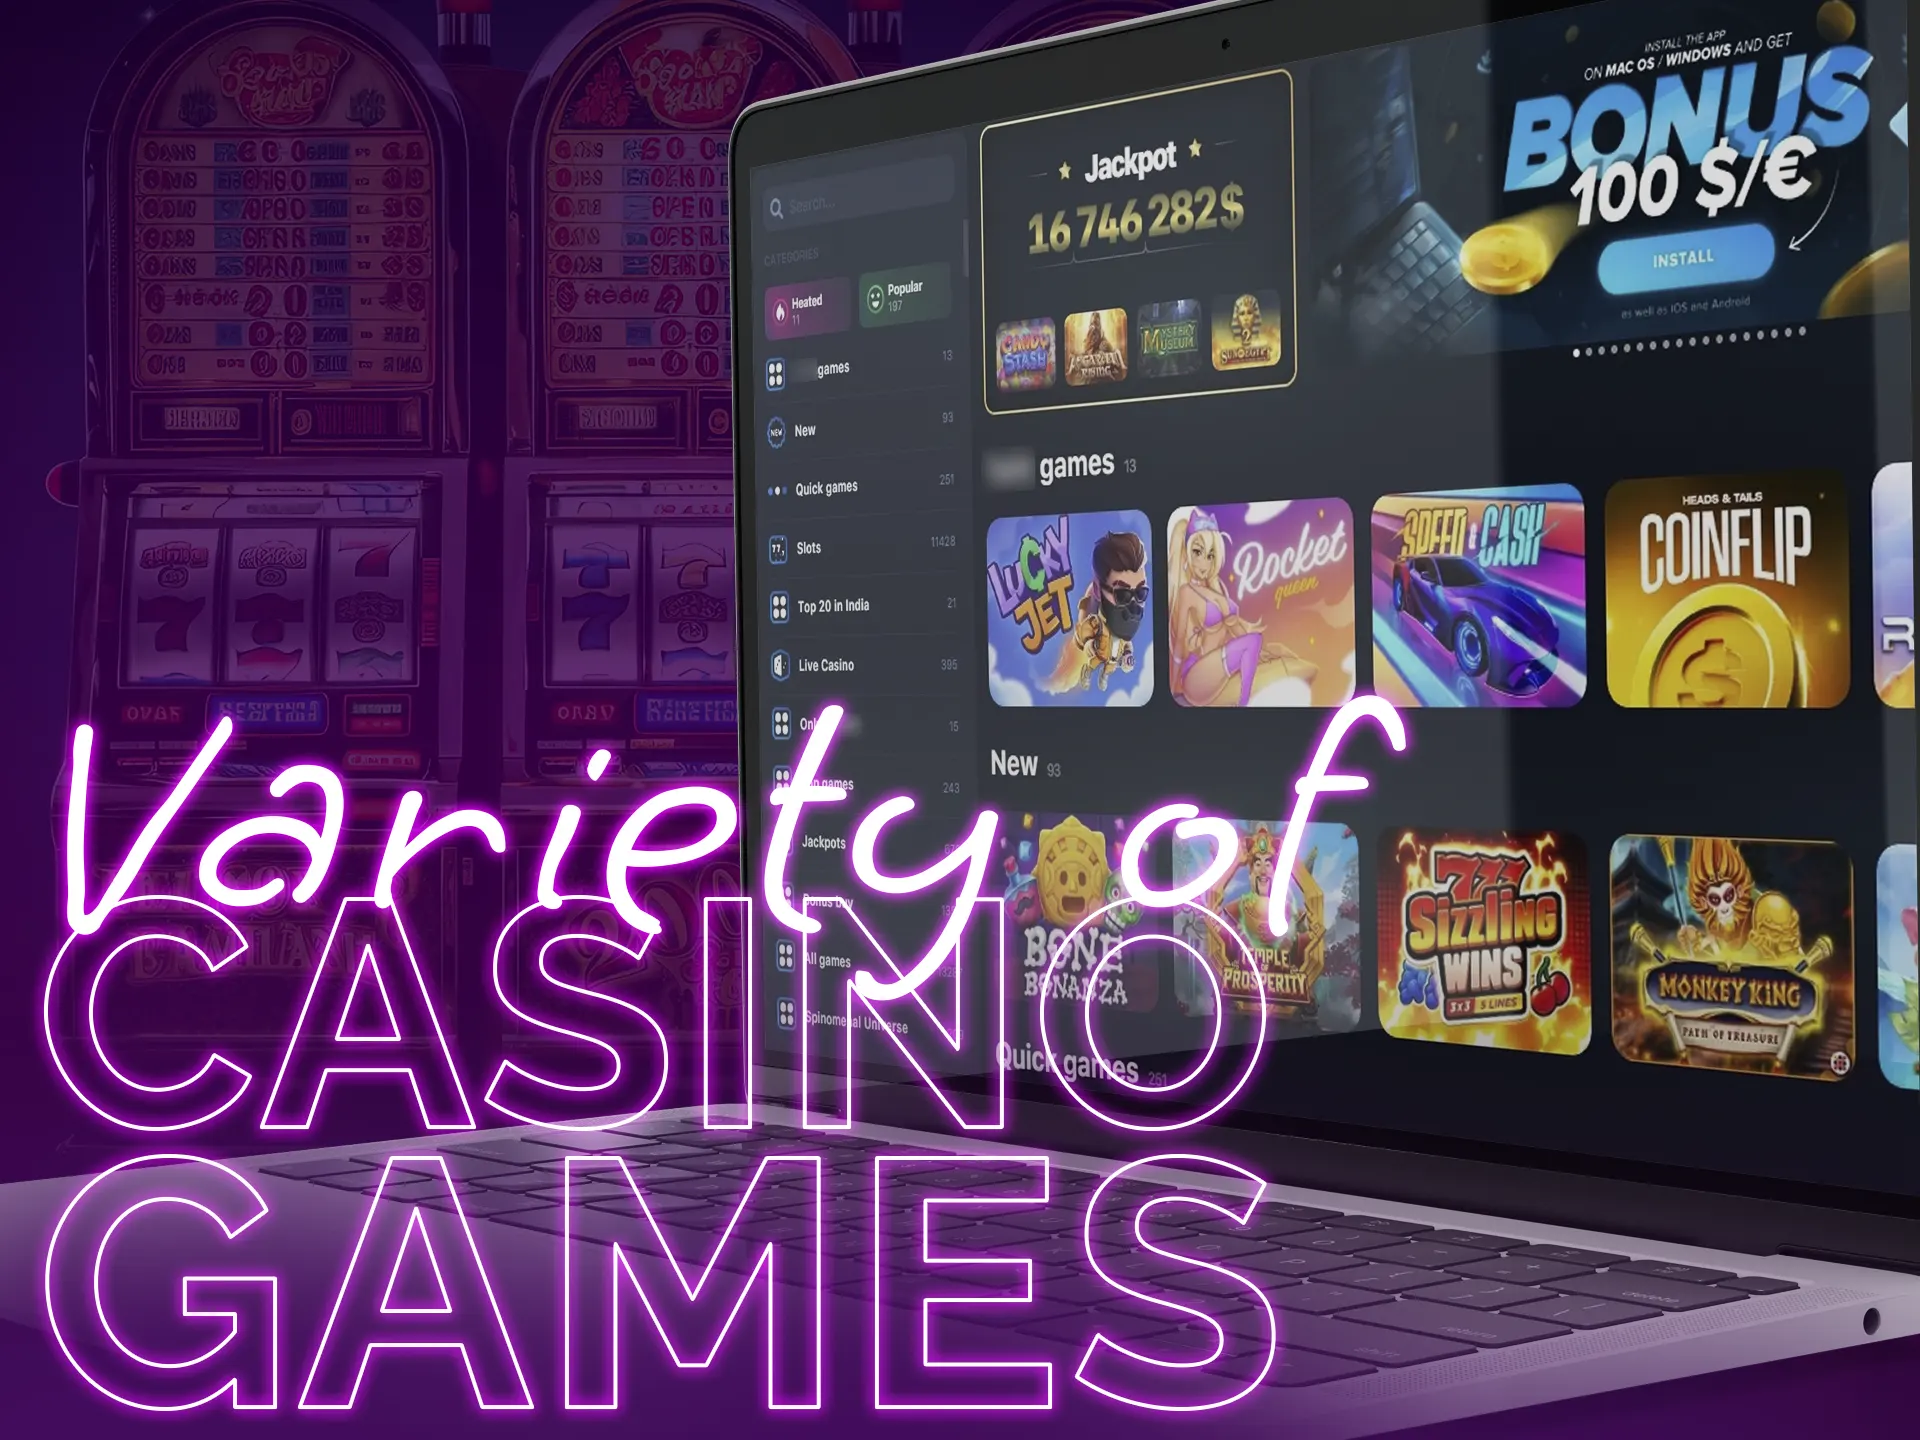 Learn and enjoy the variety of casino games.